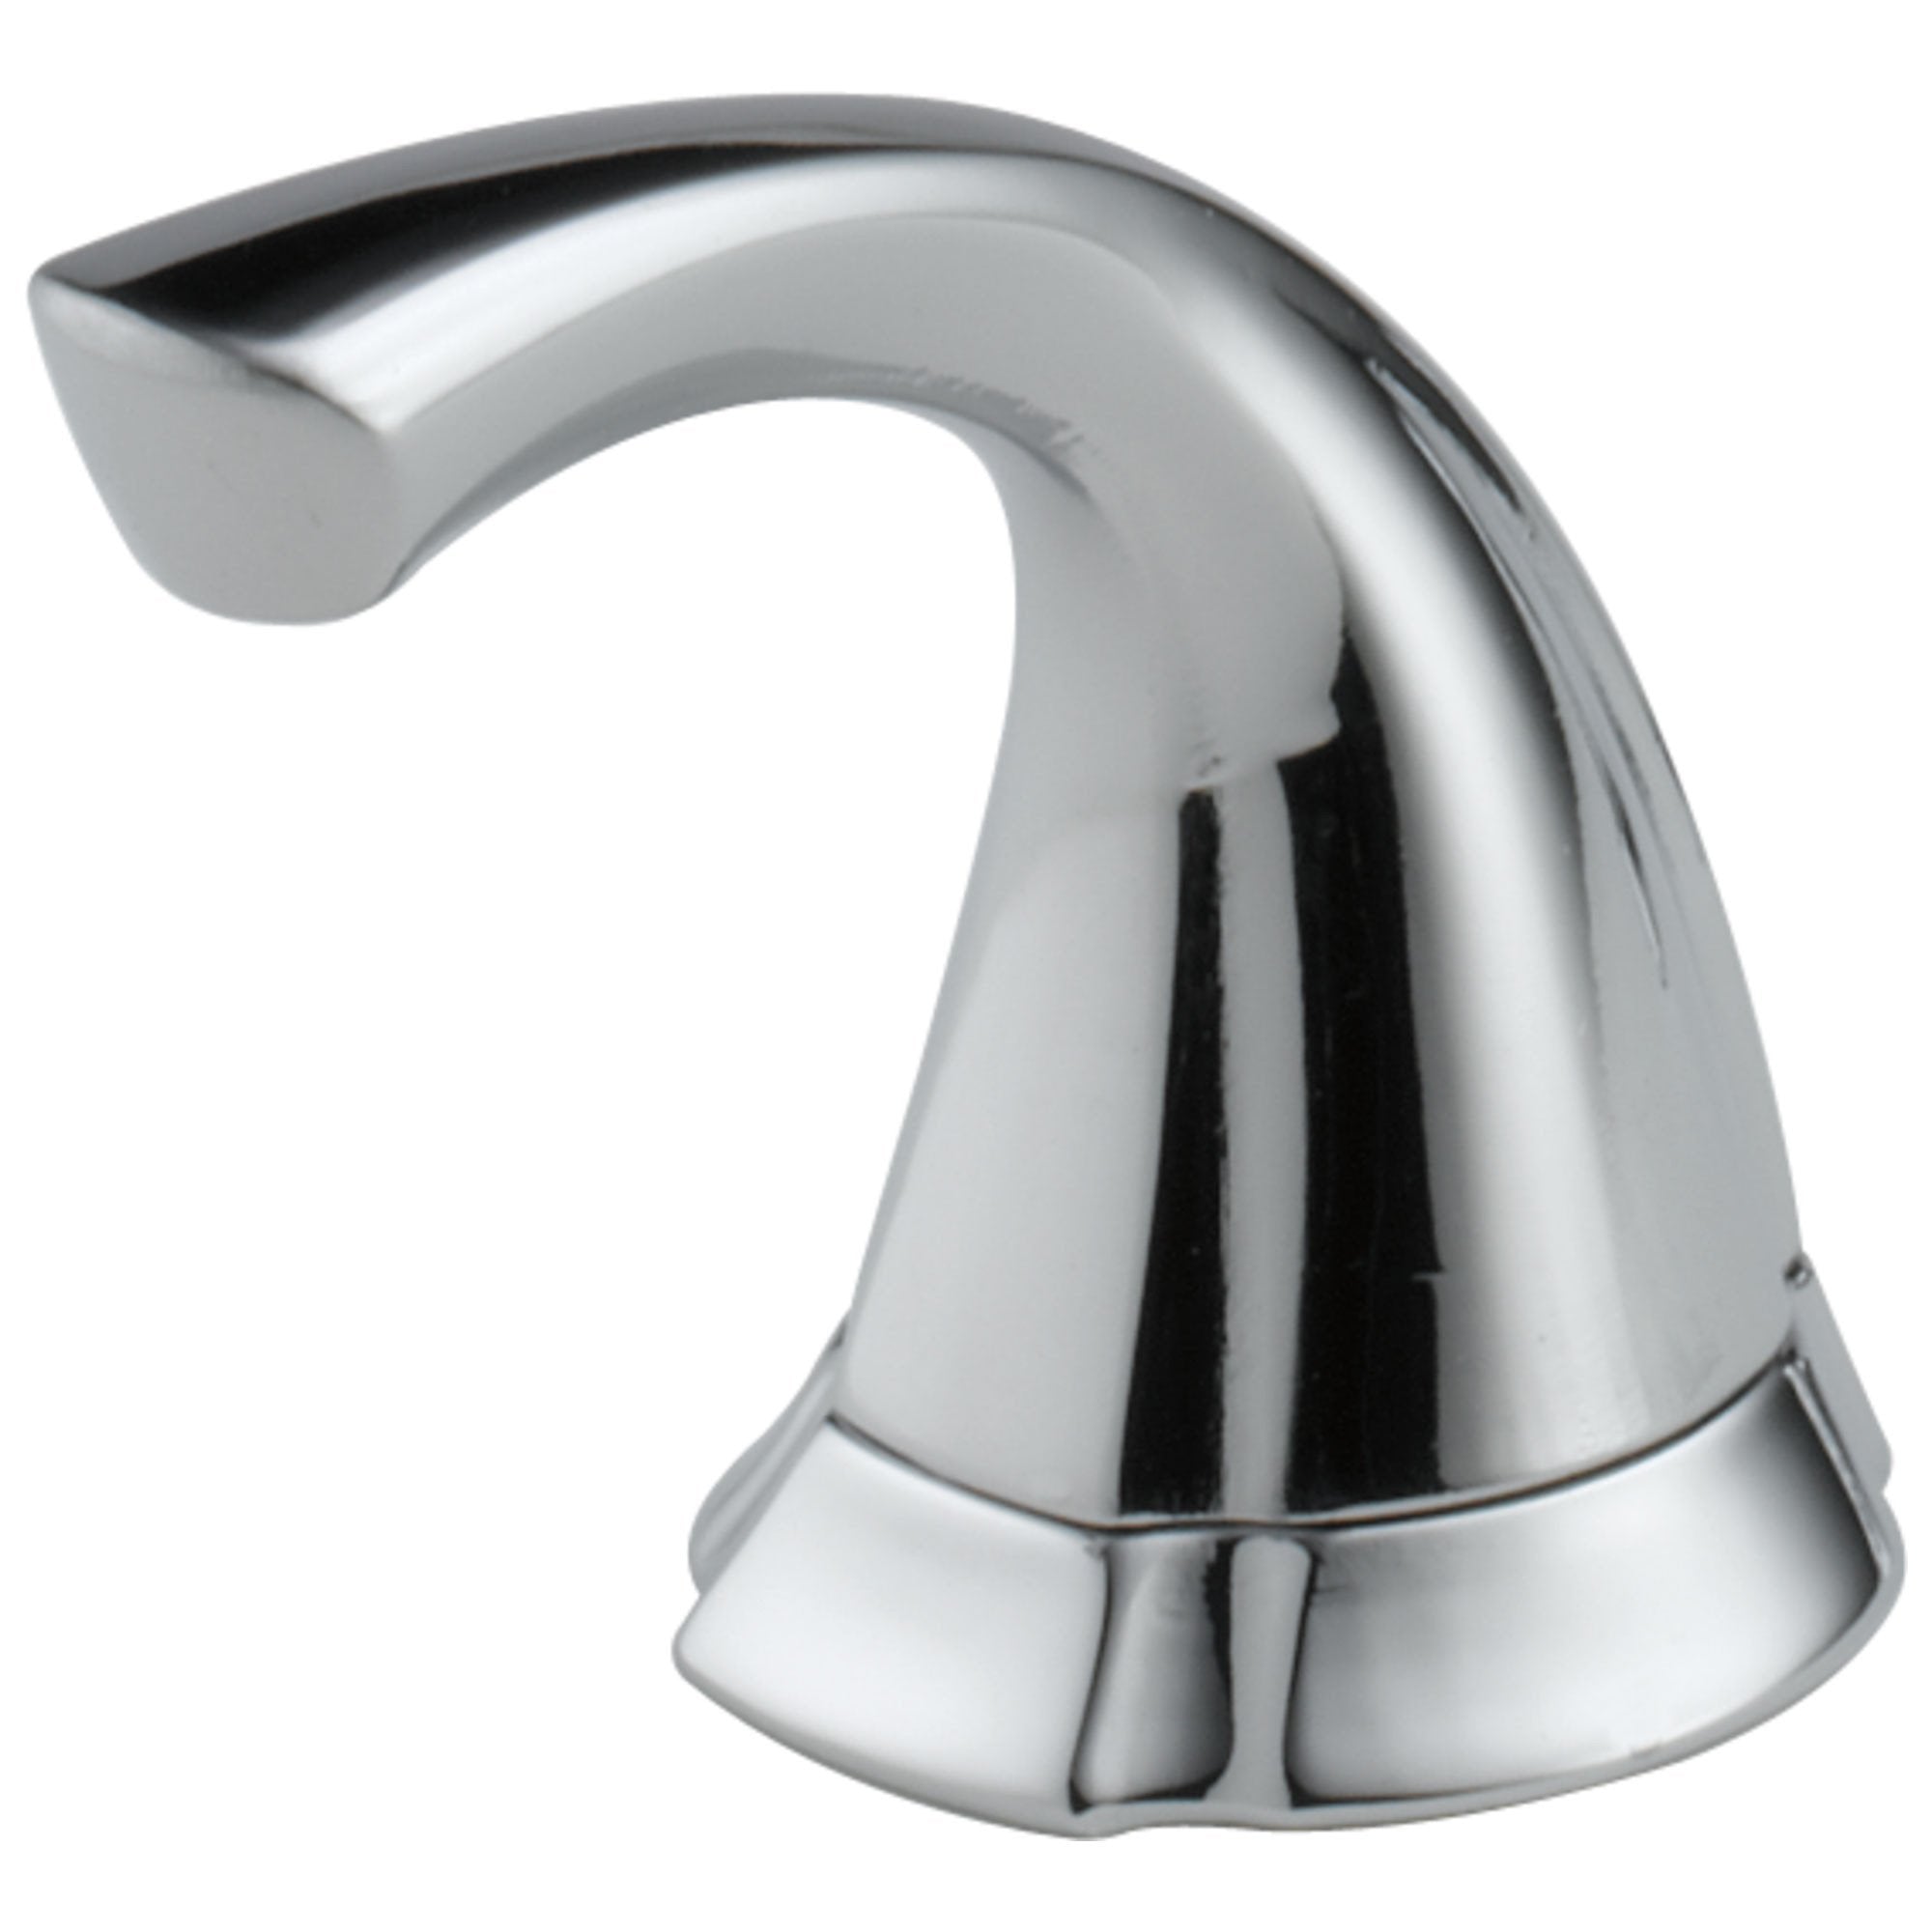 Delta Addison Collection Chrome Finish Lavatory Metal Lever Handles - Quantity 2 Included 542538